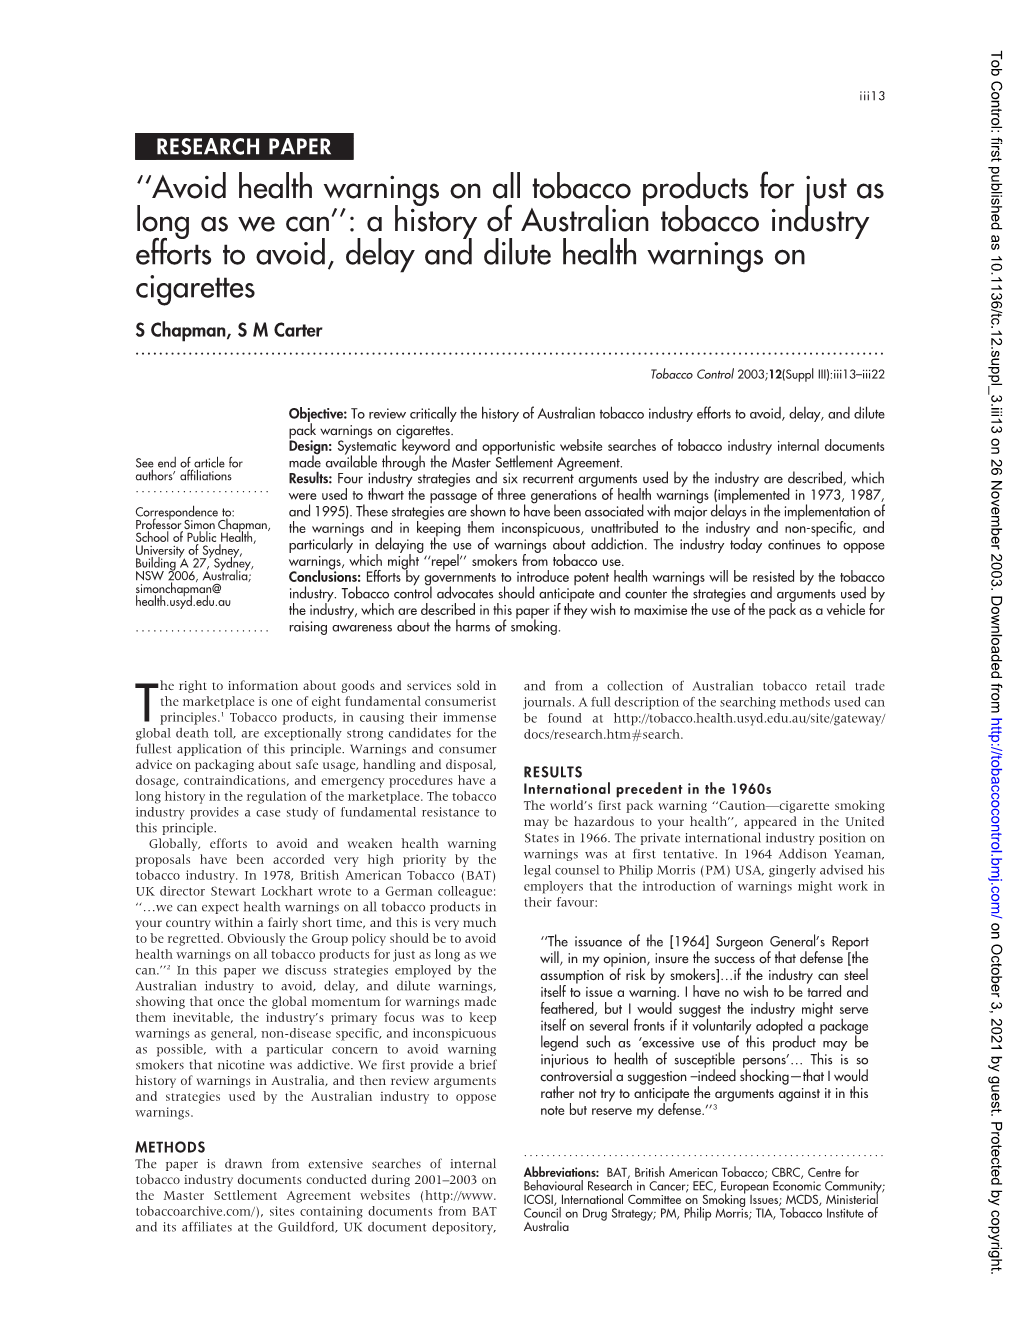 A History of Australian Tobacco Industry Efforts to Avoid, Delay and Dilute Health Warnings on Cigarettes S Chapman, S M Carter